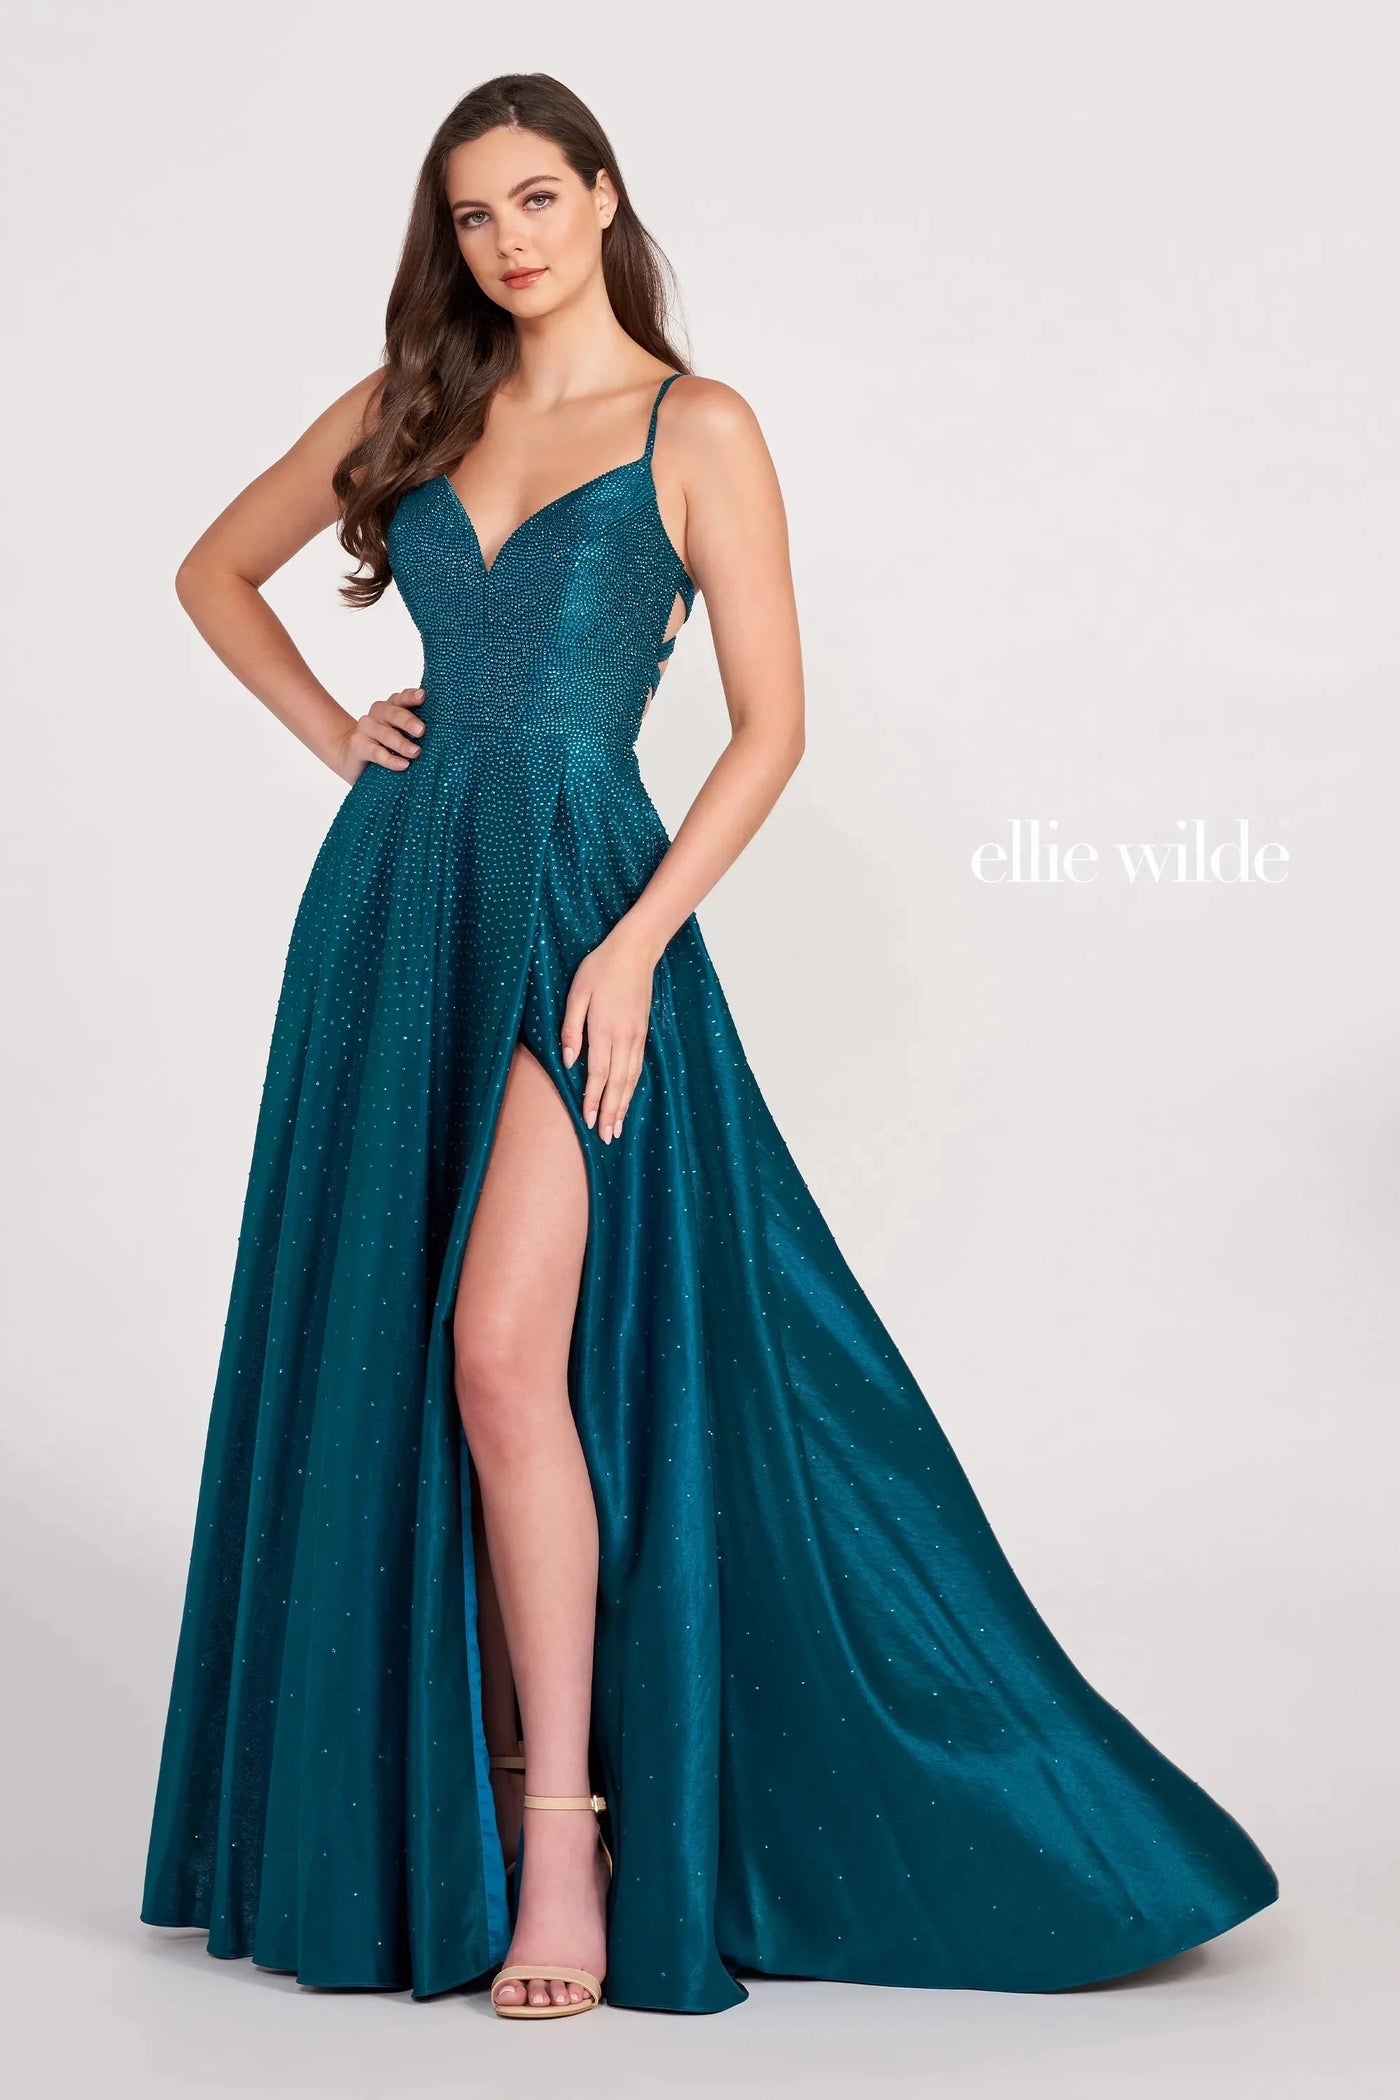 Ellie Wilde EW121001 Strappy Open Back Crystal Studded Satin Gown Prom Dresses